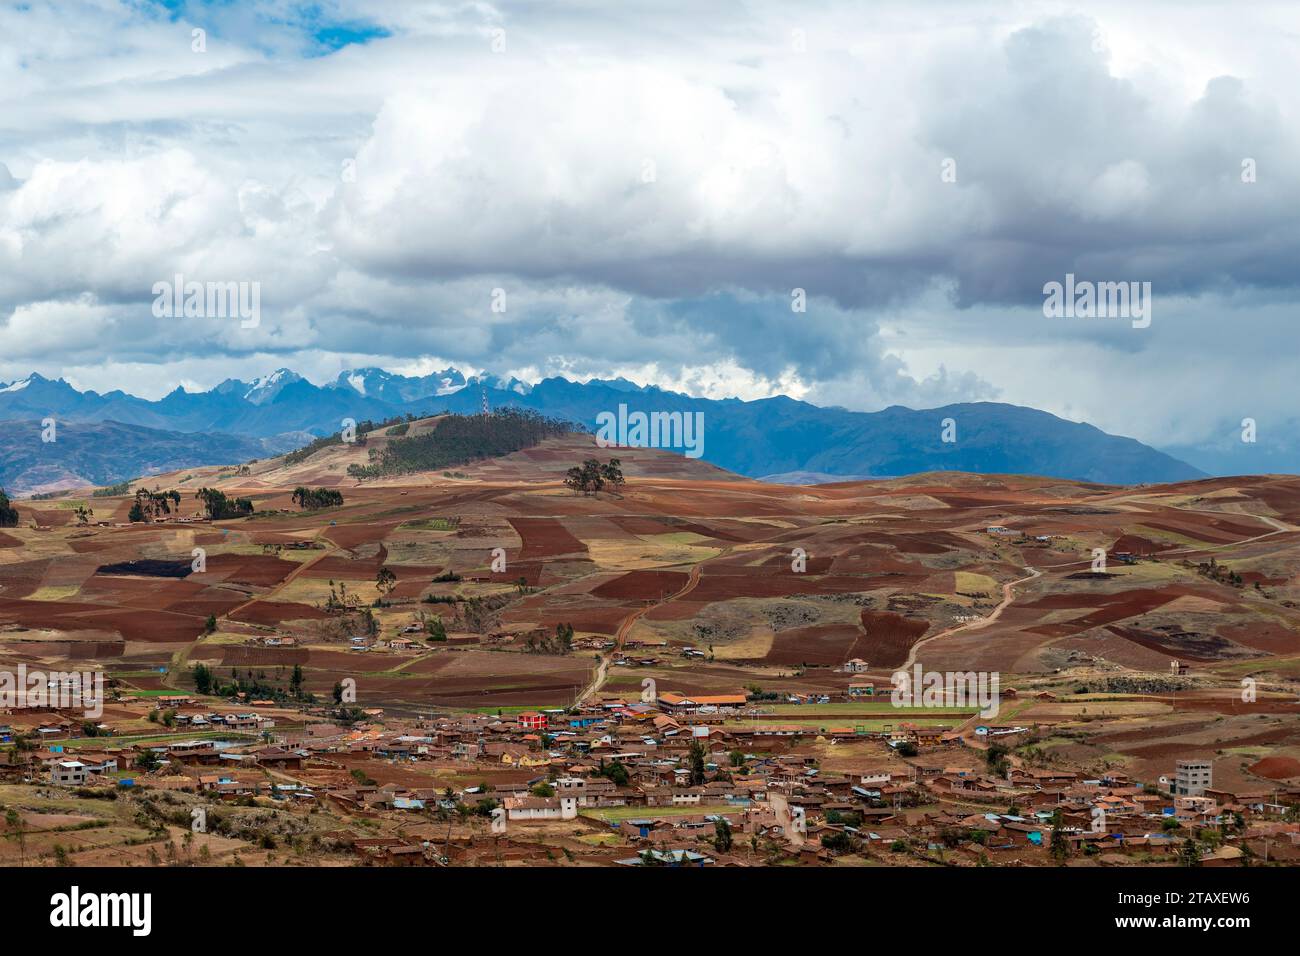 Agriculture village in the Sacred Valley of the Inca, Cusco, Peru. Stock Photo